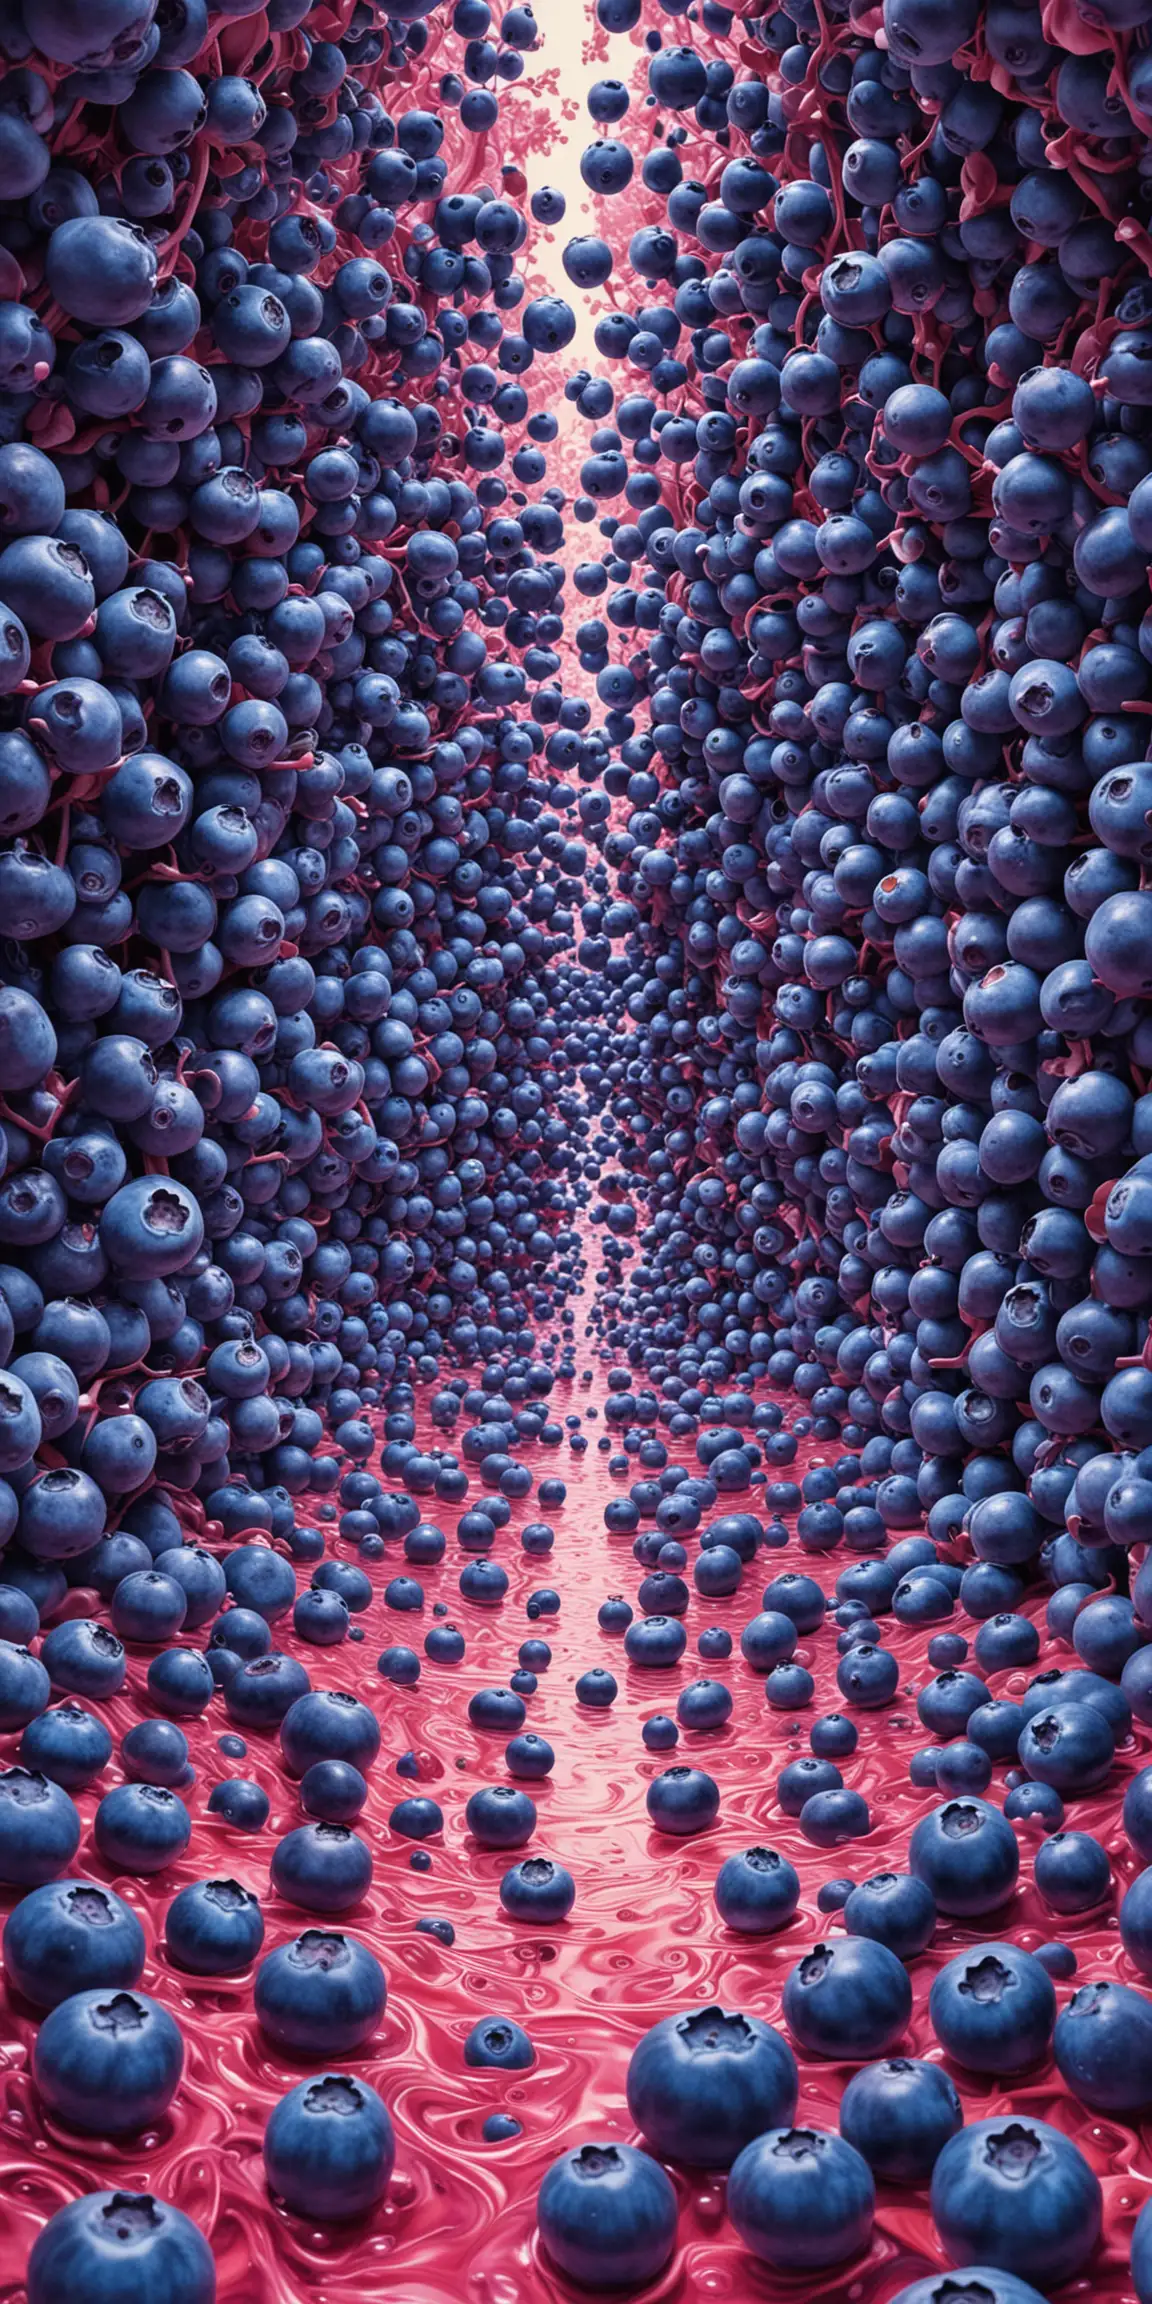 Dreamy Psychedelic Blueberry Artwork Surreal Vision of Vibrant Berries